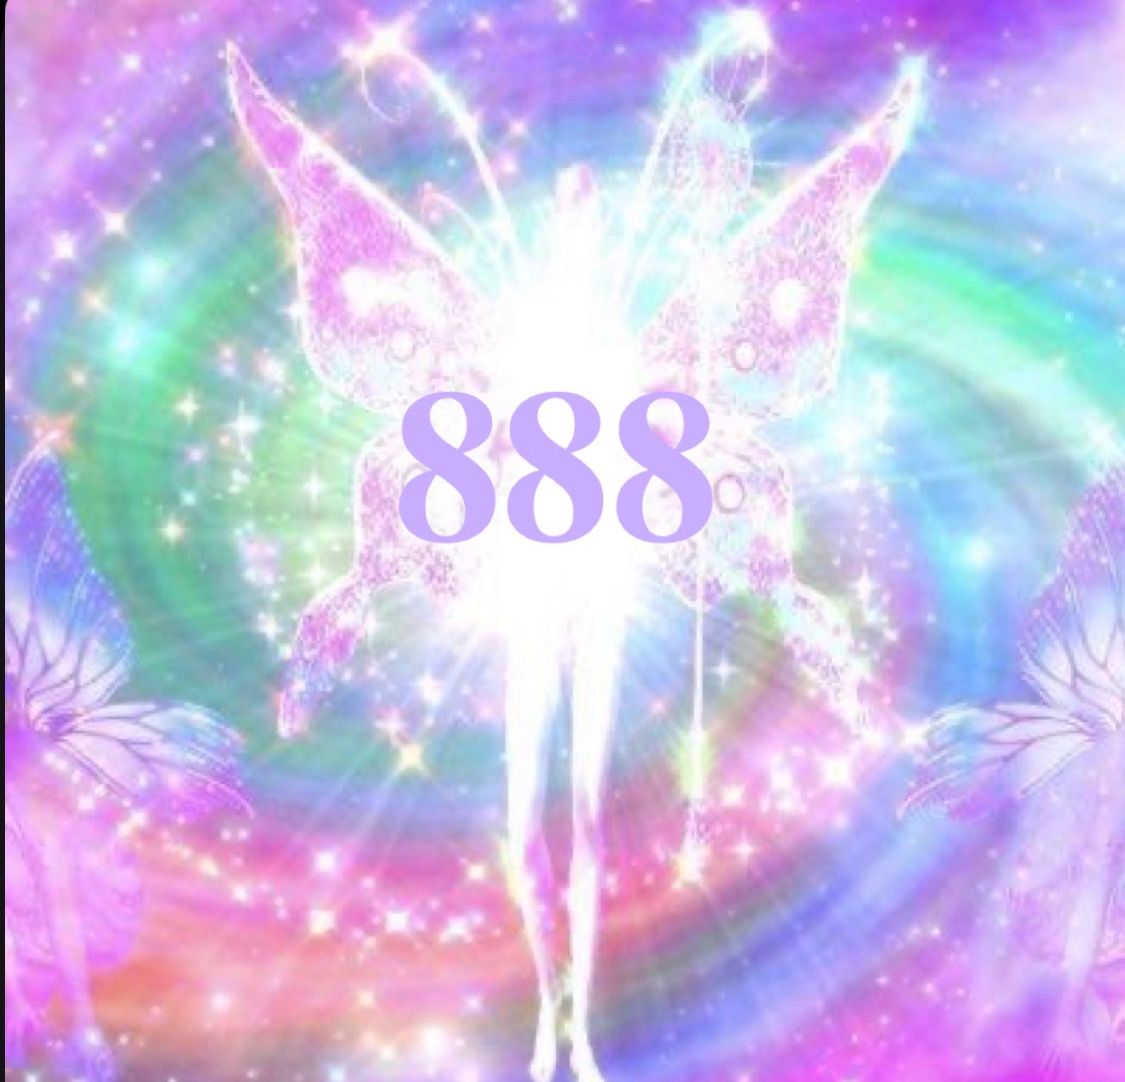 angel number 888. Aura colors, Spiritual art, Photo wall collage